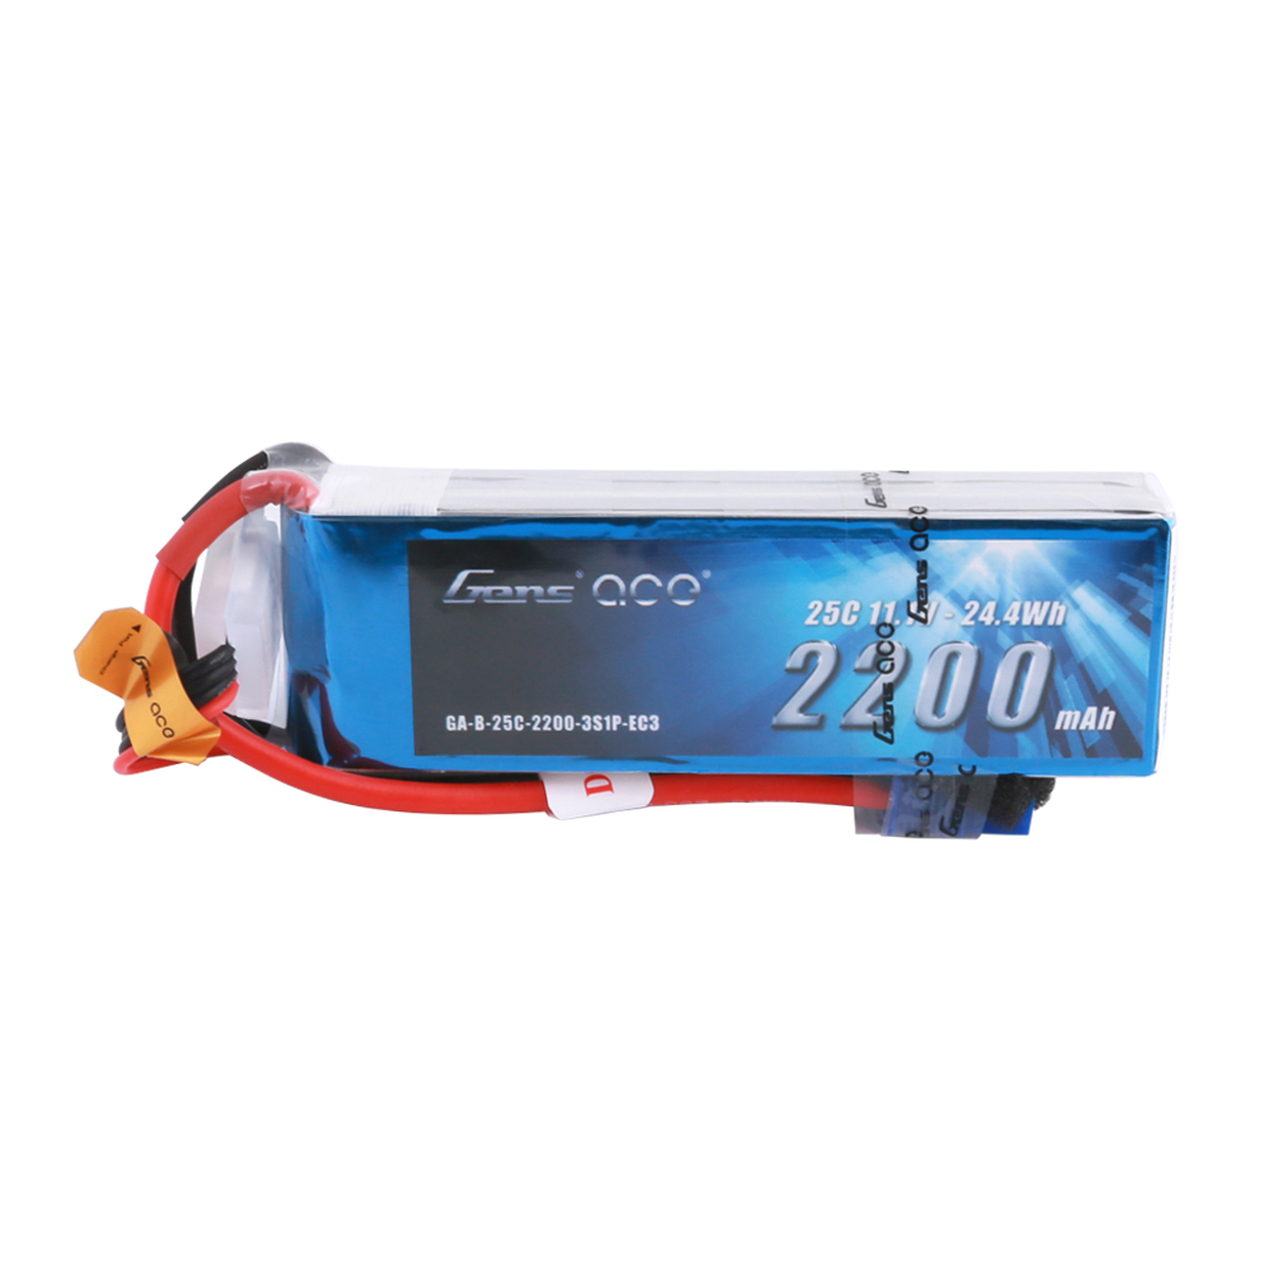 Gens ace 2200mAh 3S 11.1V 25C Lipo Battery Pack with EC3 Plug for RC Plane